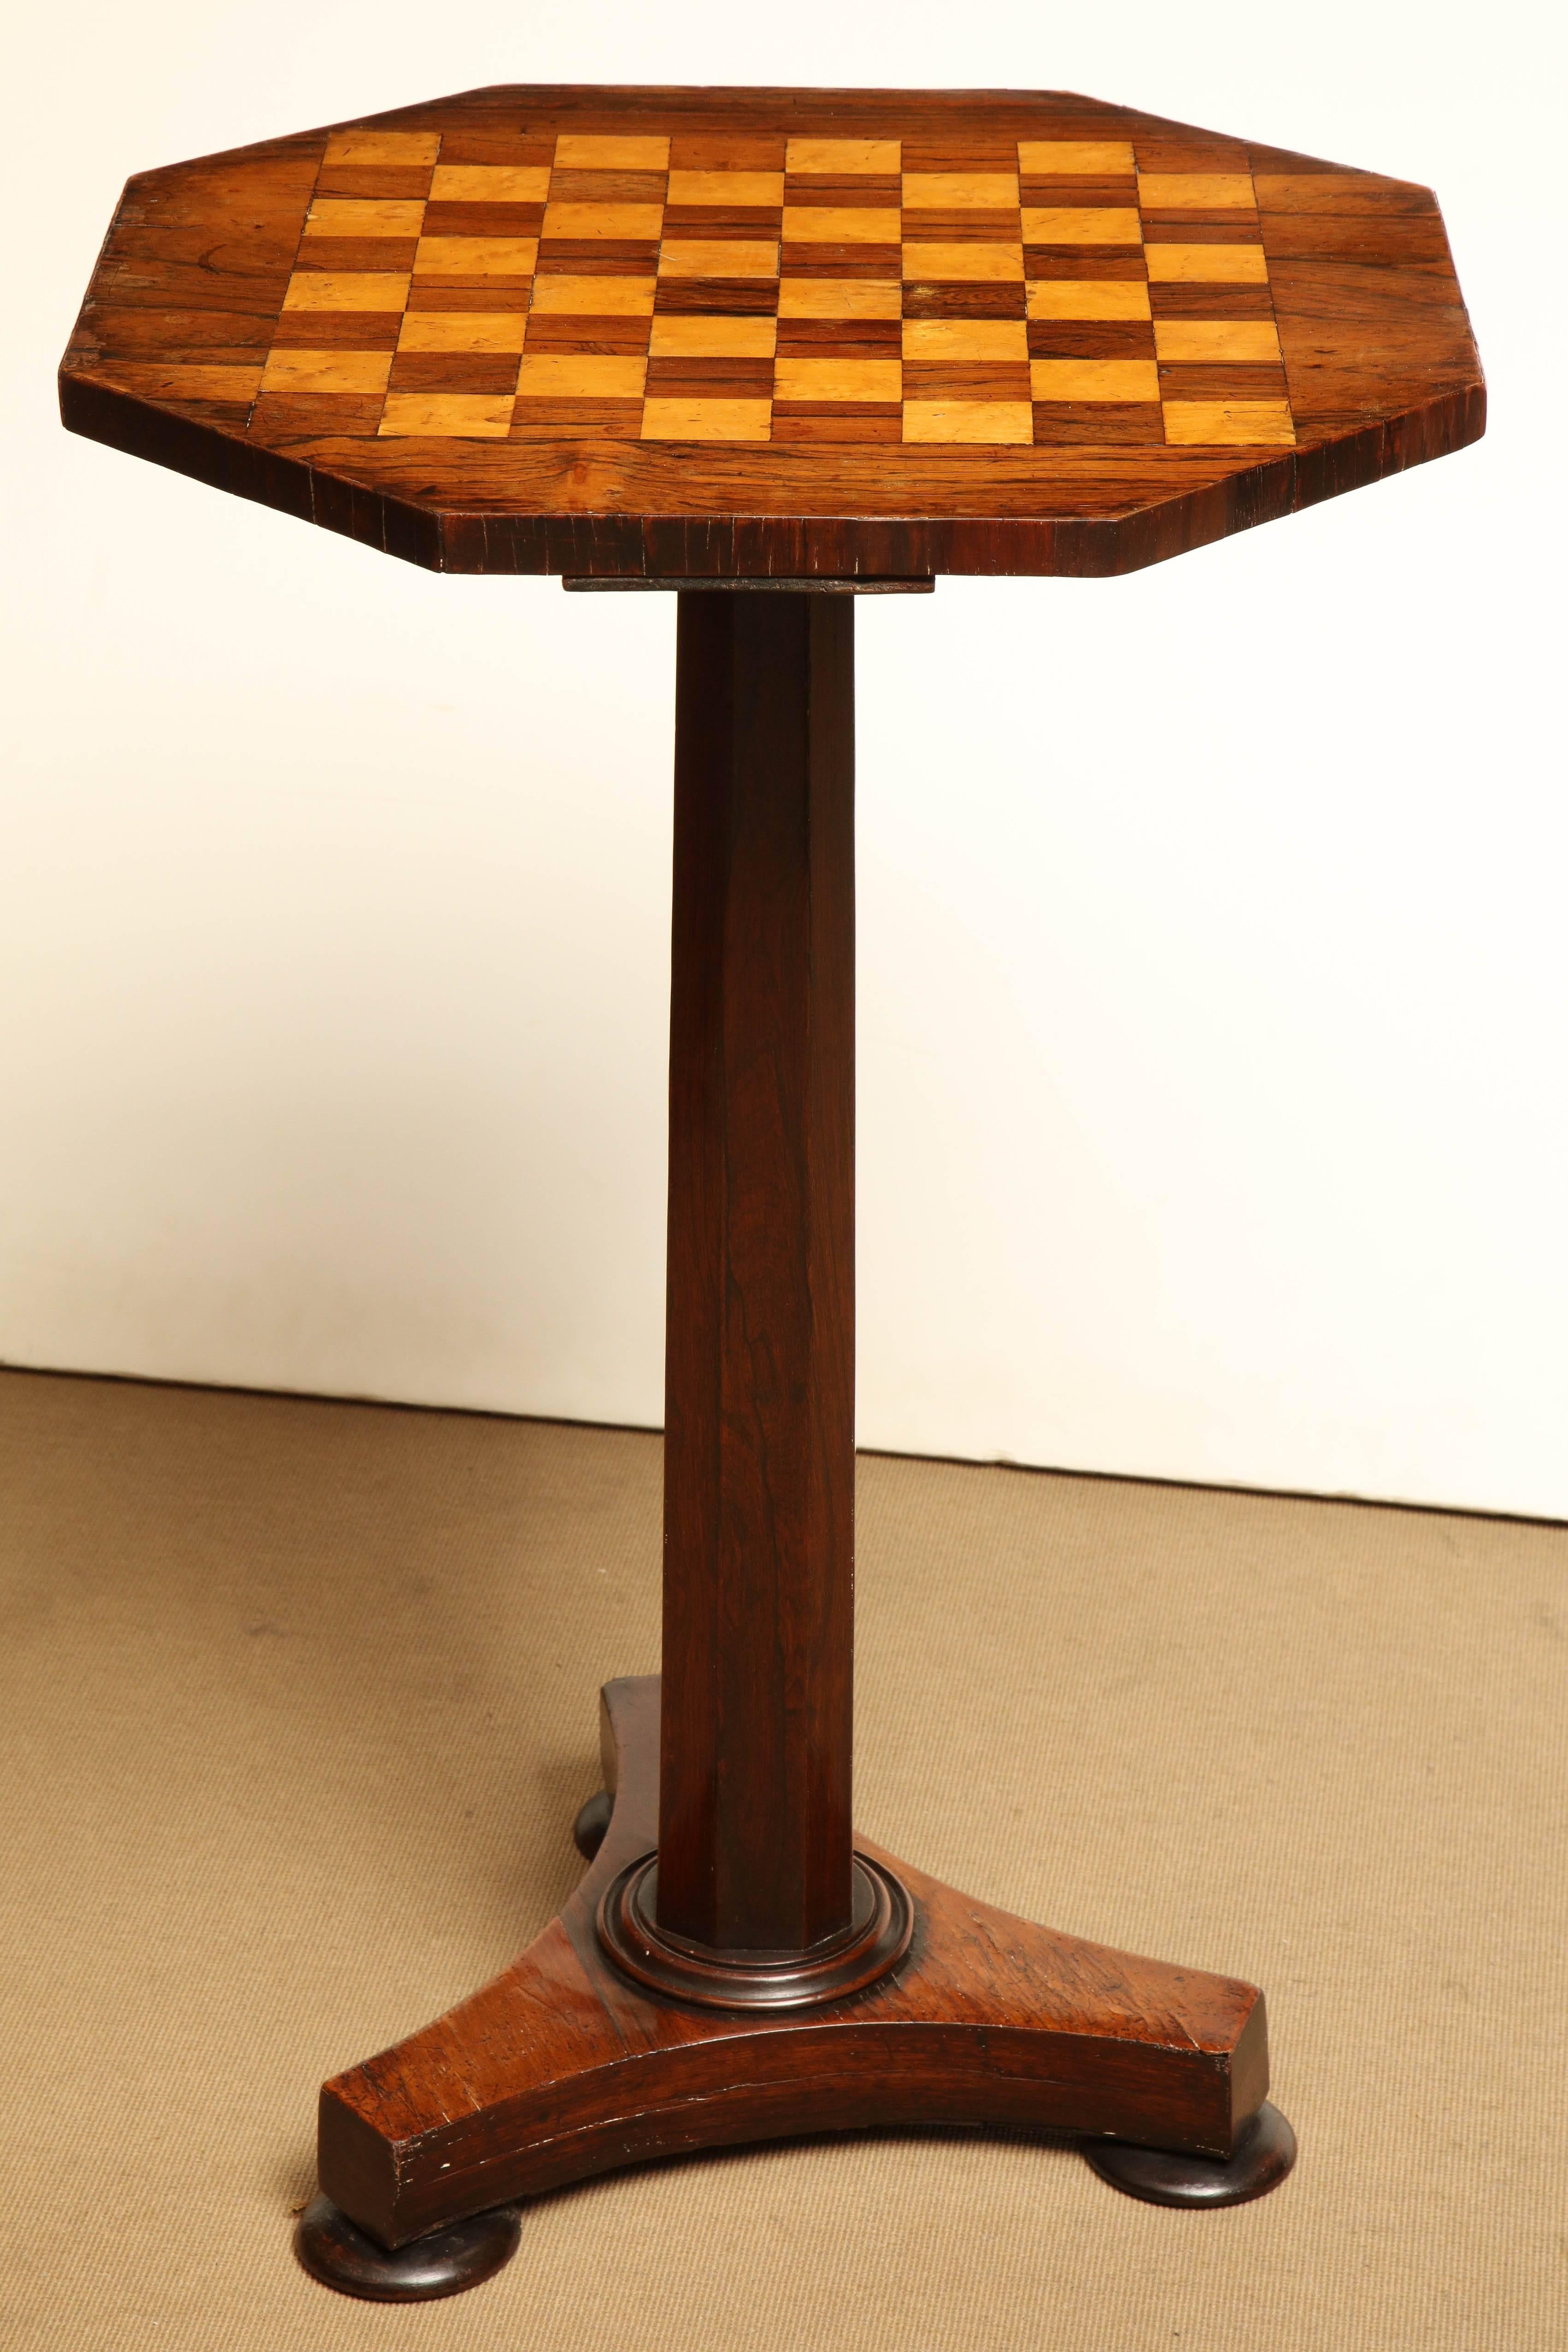 Mid-19th Century English Octagonal Table with Game Board Top 3